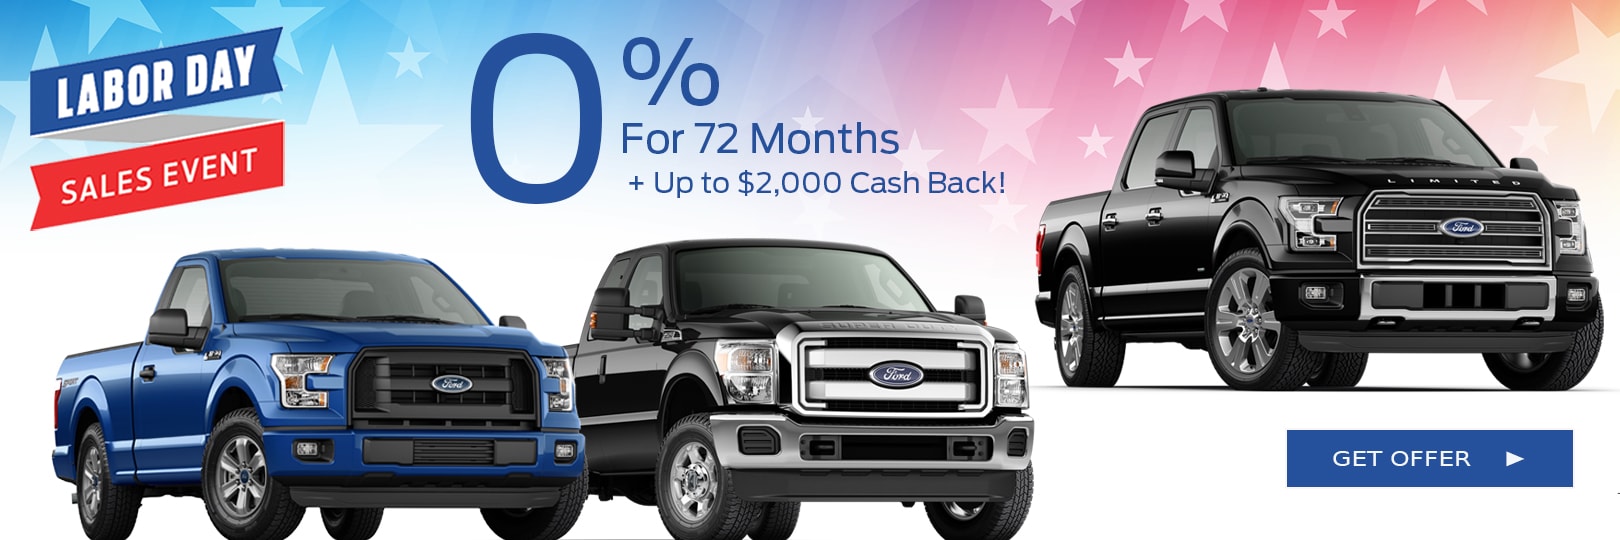 Koons Ford Labor Day Sales Event Koons Ford Of Annapolis